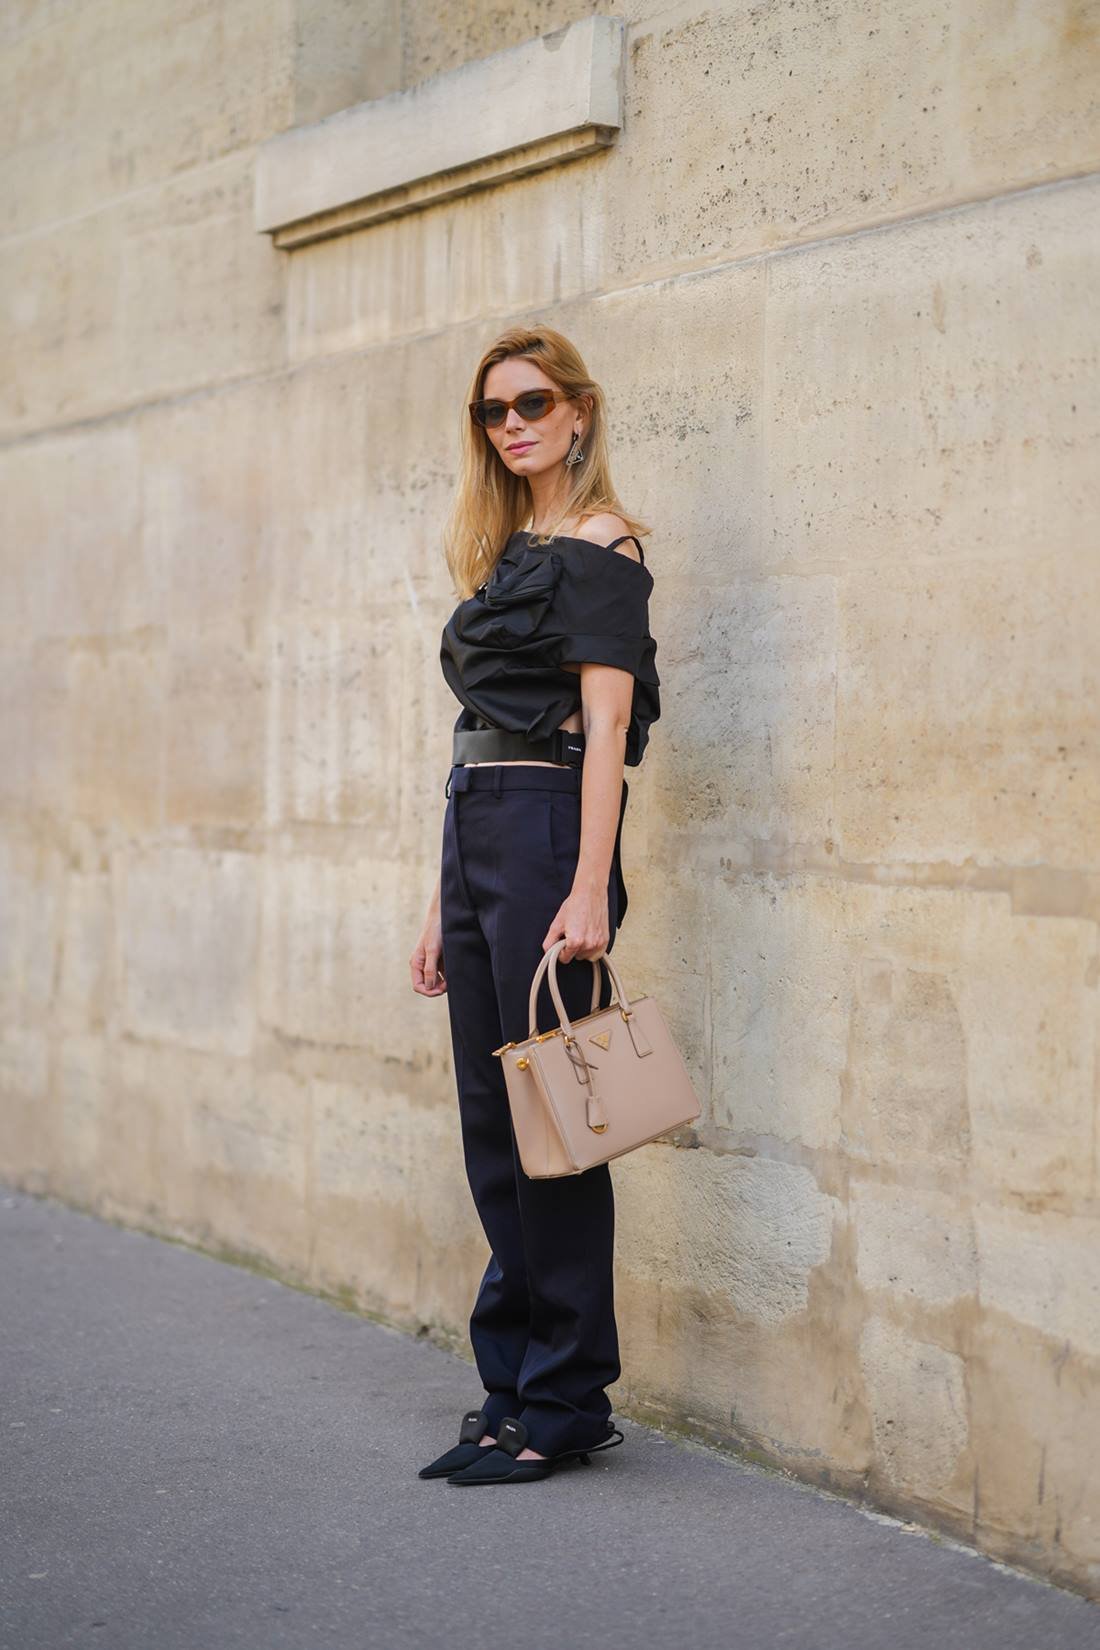 Young Caucasian woman with straight blond hair poses for a photo against a brown wall.  She wears a blouse and trousers, both in black, sunglasses and a beige leather Prada bag called Galleria.  - Metropolises